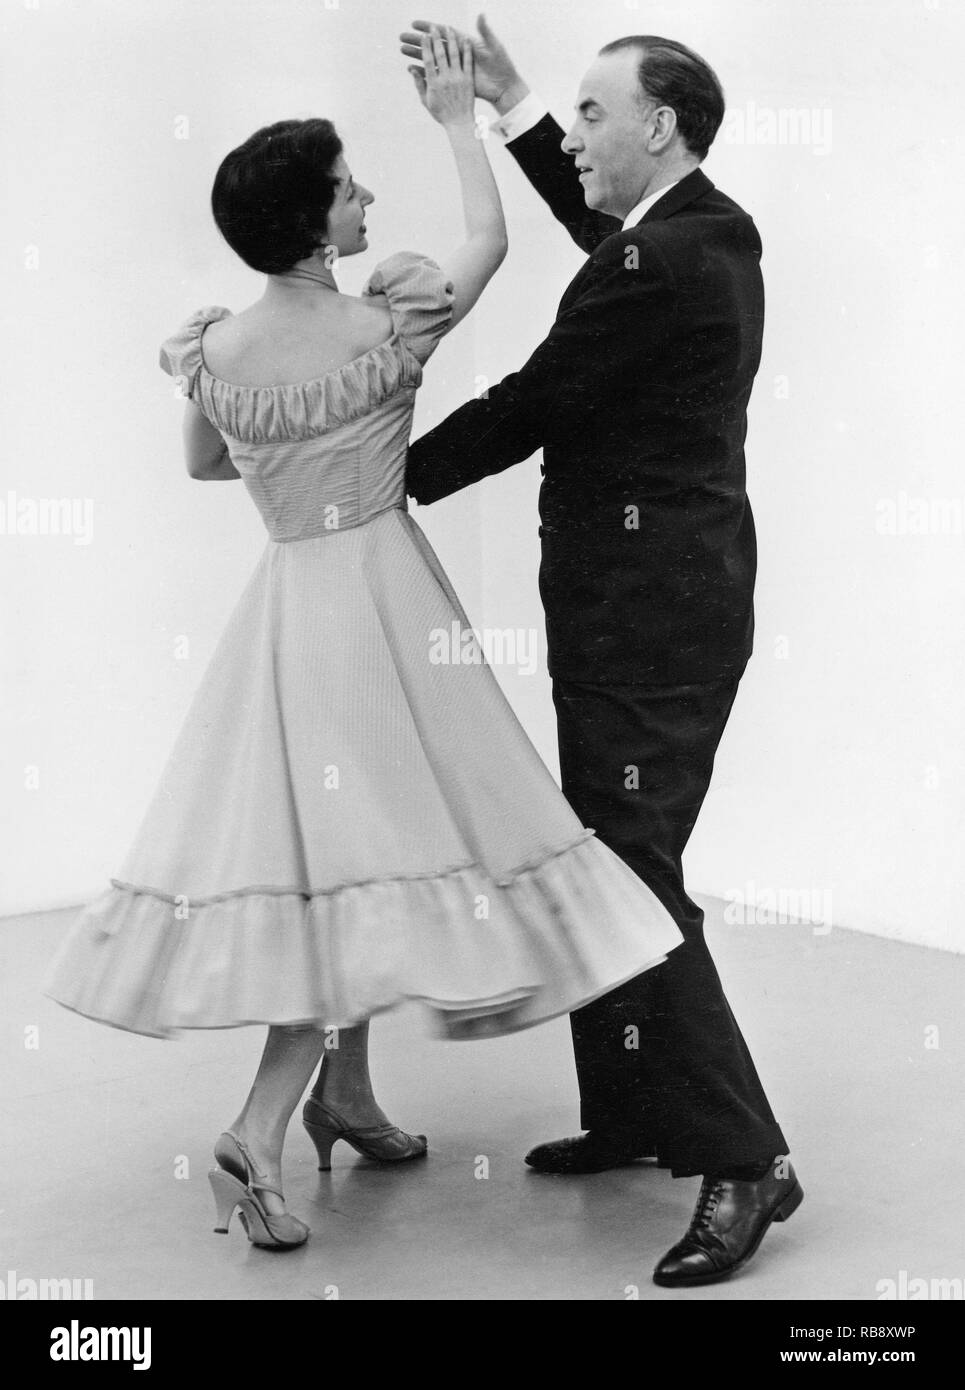 Learning to dance in the 1950s. A dancing teacher, Holger Rosenquist,  with his student, Gunnel Lindgren,  is learning how to dance the Mambo dance. Sweden 1955 Stock Photo